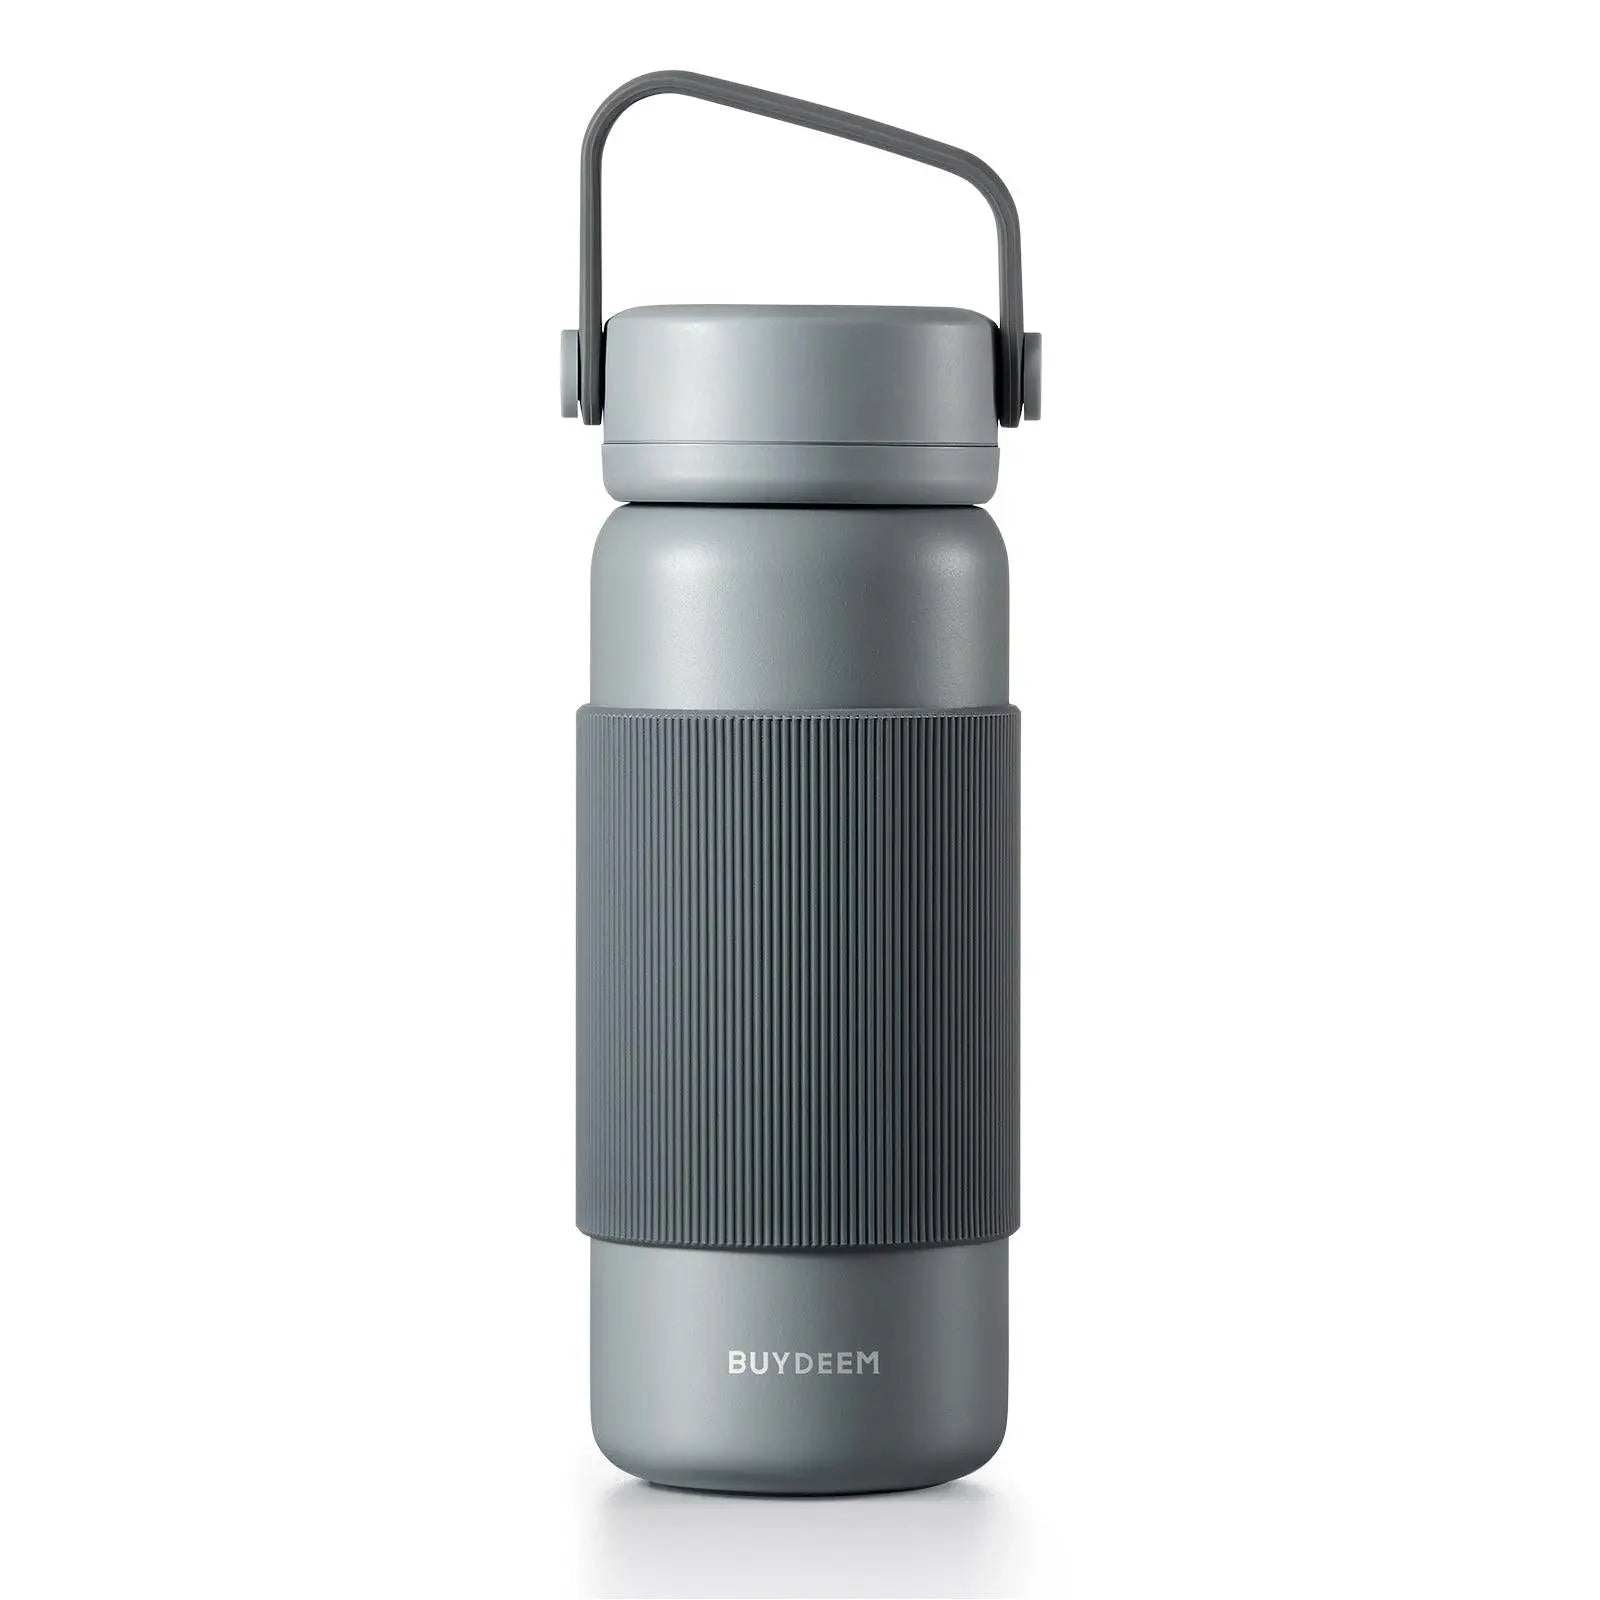 https://us.buydeem.com/cdn/shop/products/BUYDEEM-CD1011-Stainless-Steel-Thermos-Tea-Bottle-with-Removable-Infuser-BuydeemUS-1657519713.jpg?v=1702019148